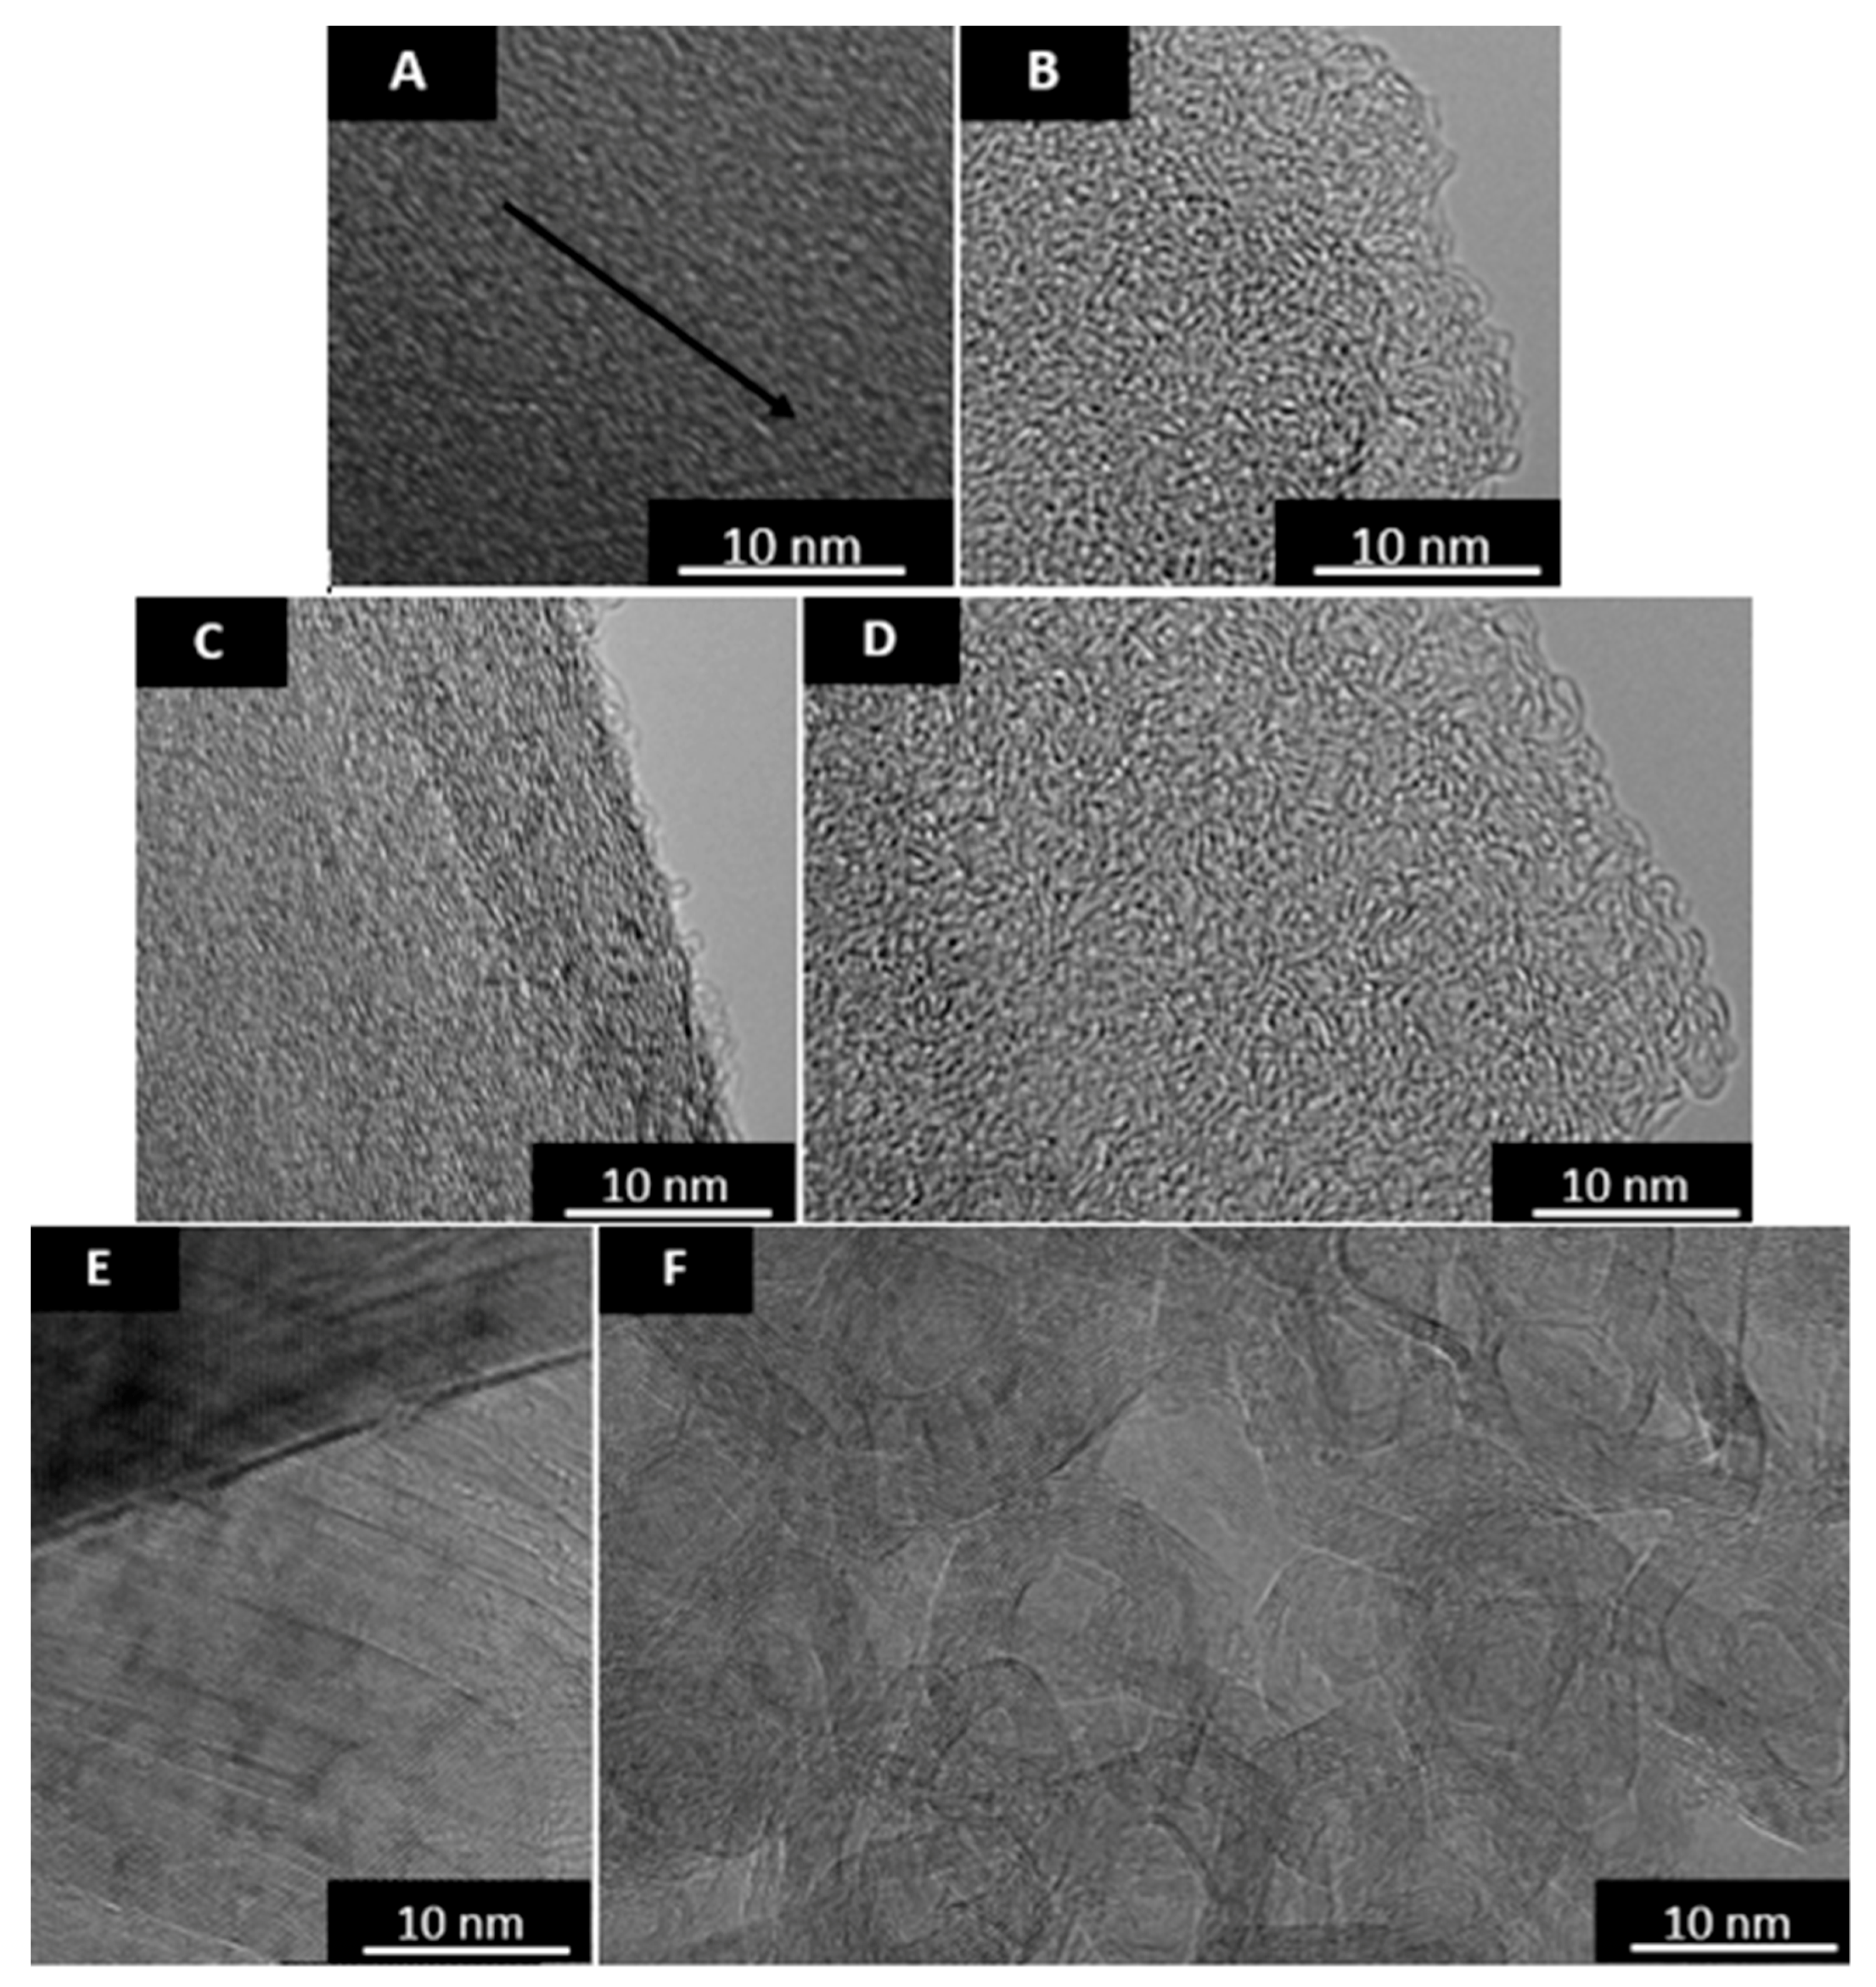 C Free Full Text Trajectories Of Graphitizable Anthracene Coke And Non Graphitizable Sucrose Char During The Earliest Stages Of Annealing By Rapid Co2 Laser Heating Html